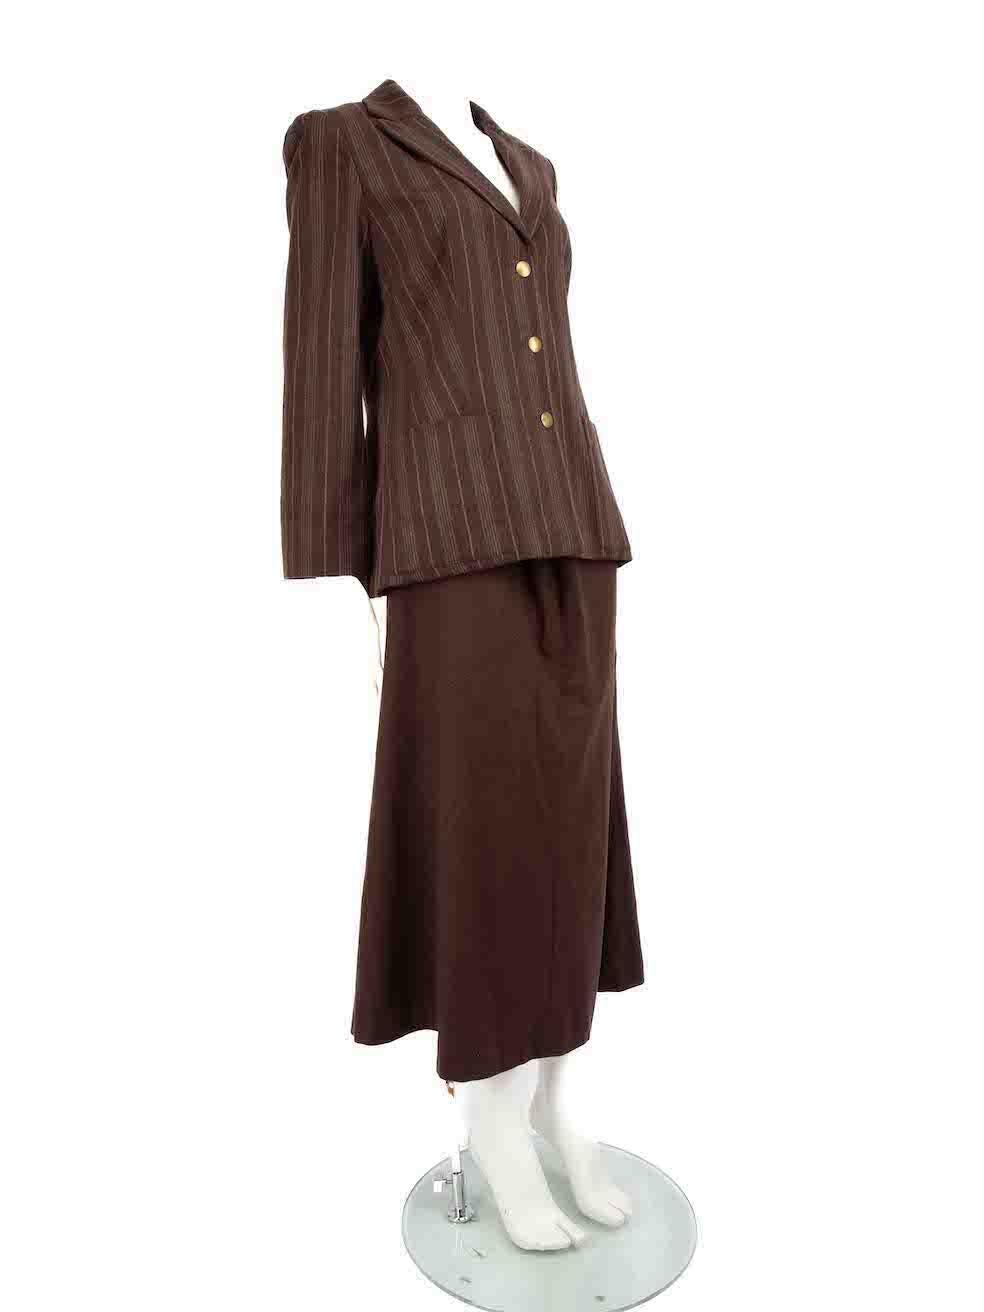 CONDITION is Very good. Minimal wear to the set is evident. Minimal wear to the buttons is seen with tarnishing however, the skirt has hardly any visible wear on this used Kenzo Jungle designer resale item.
 
 
 
 Details
 
 
 Brown
 
 Wool
 
 Skirt